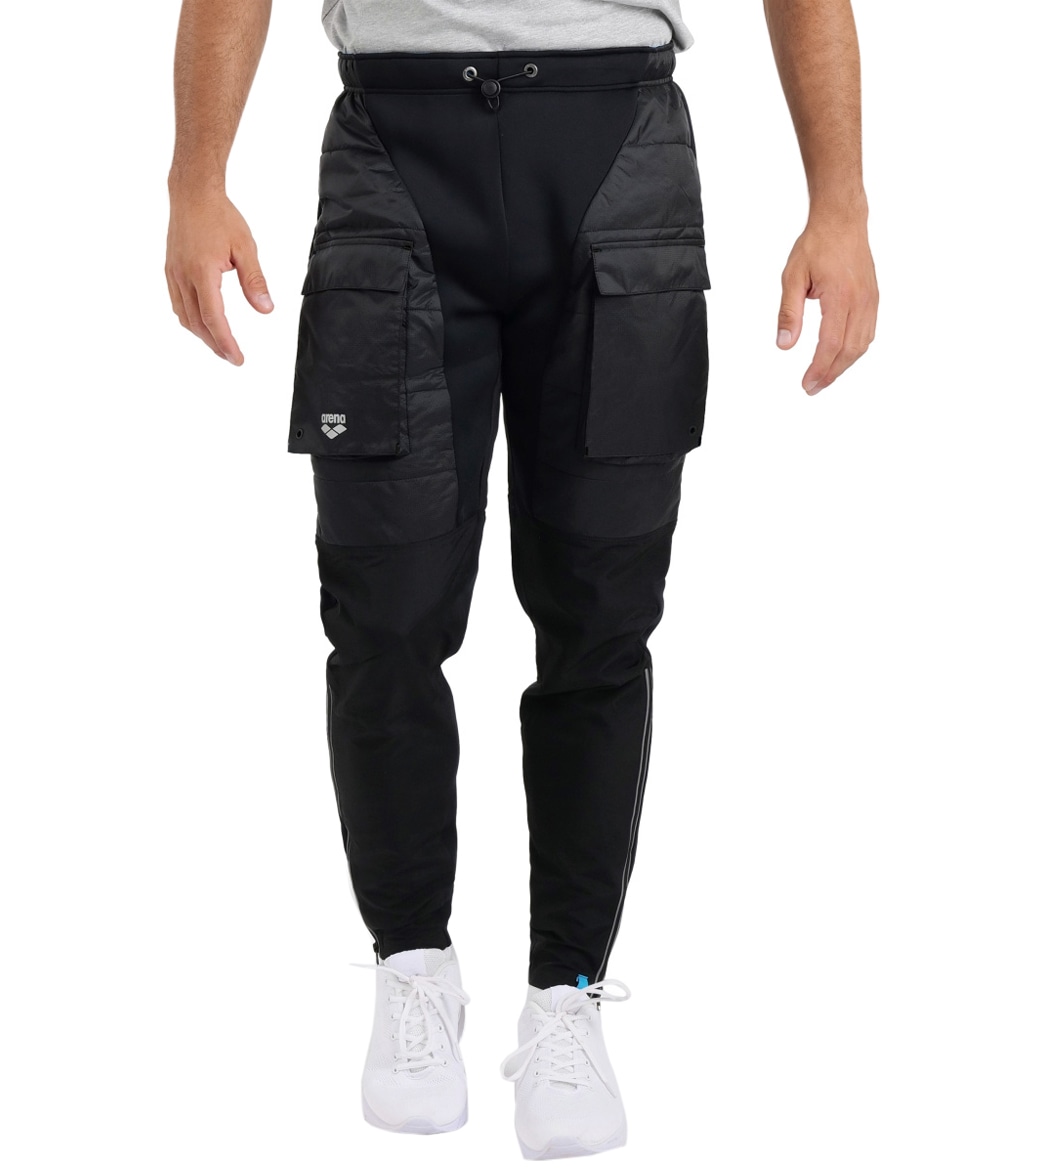 Arena Men's Team Half-Quilted Pants - Black Small 100% Polyamide - Swimoutlet.com